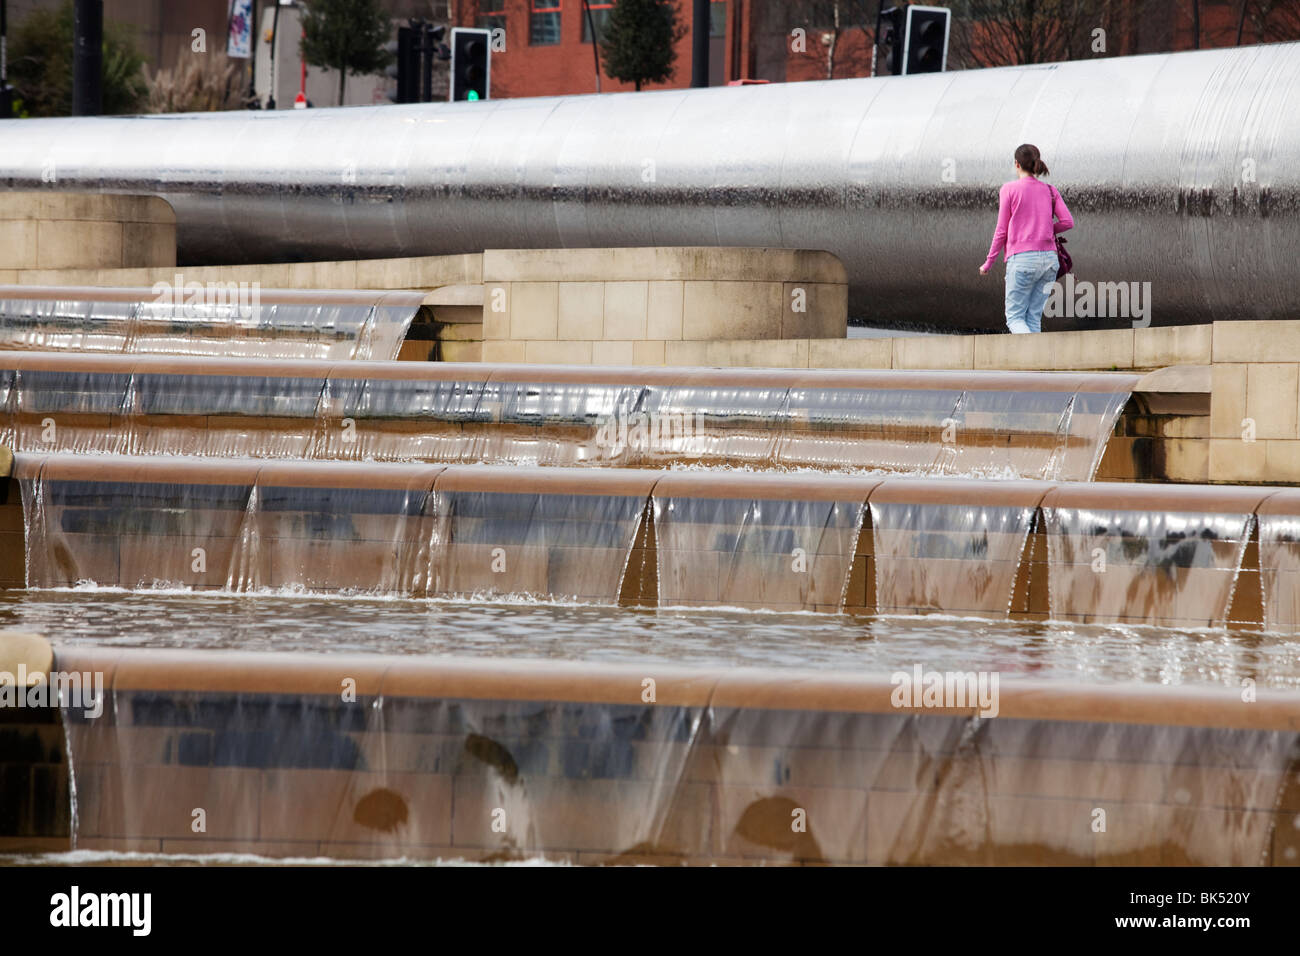 The water feature in Sheaf Square, Sheffield, UK Stock Photo